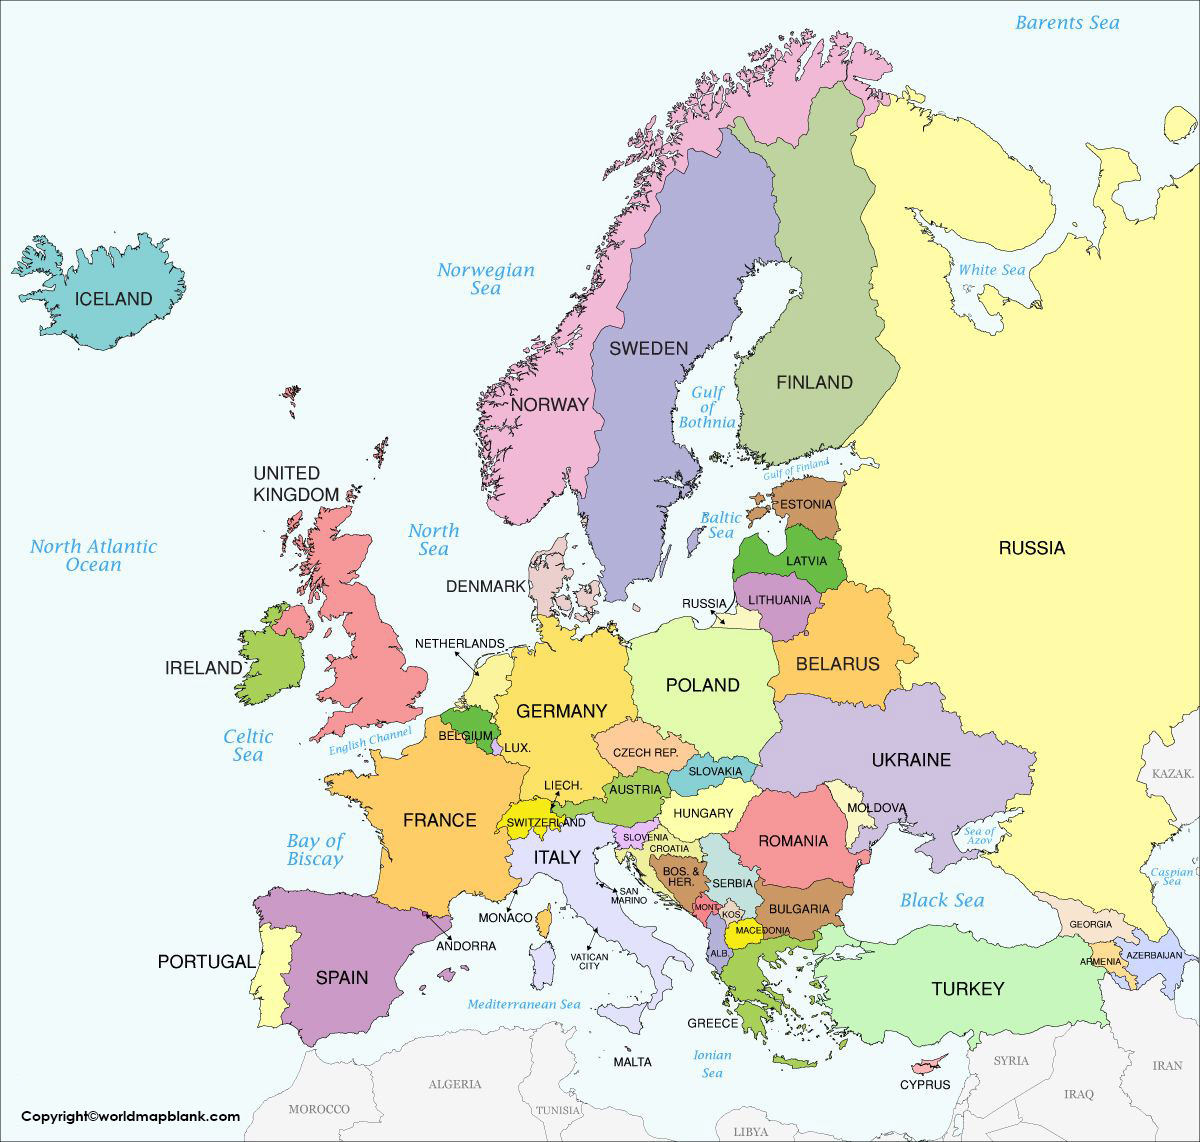 Europe Capitals Map With Countries Labeled Hot Sex Picture Hot